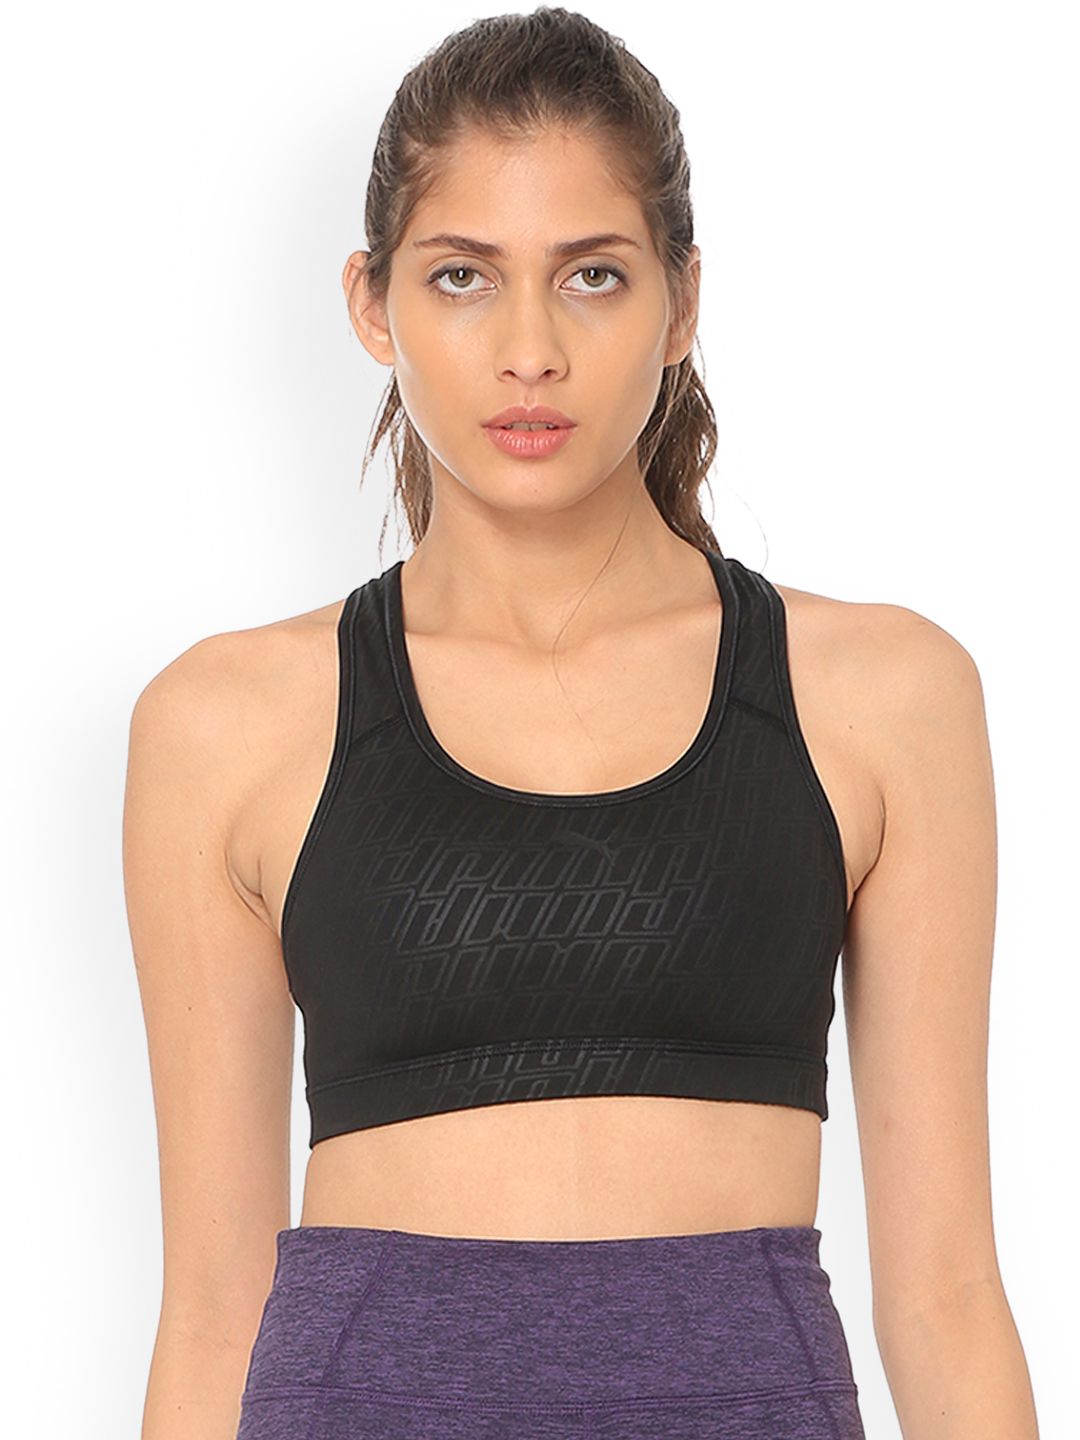 Puma Black Printed Non-Wired Lightly Padded Sports Bra 51699715 Price in India